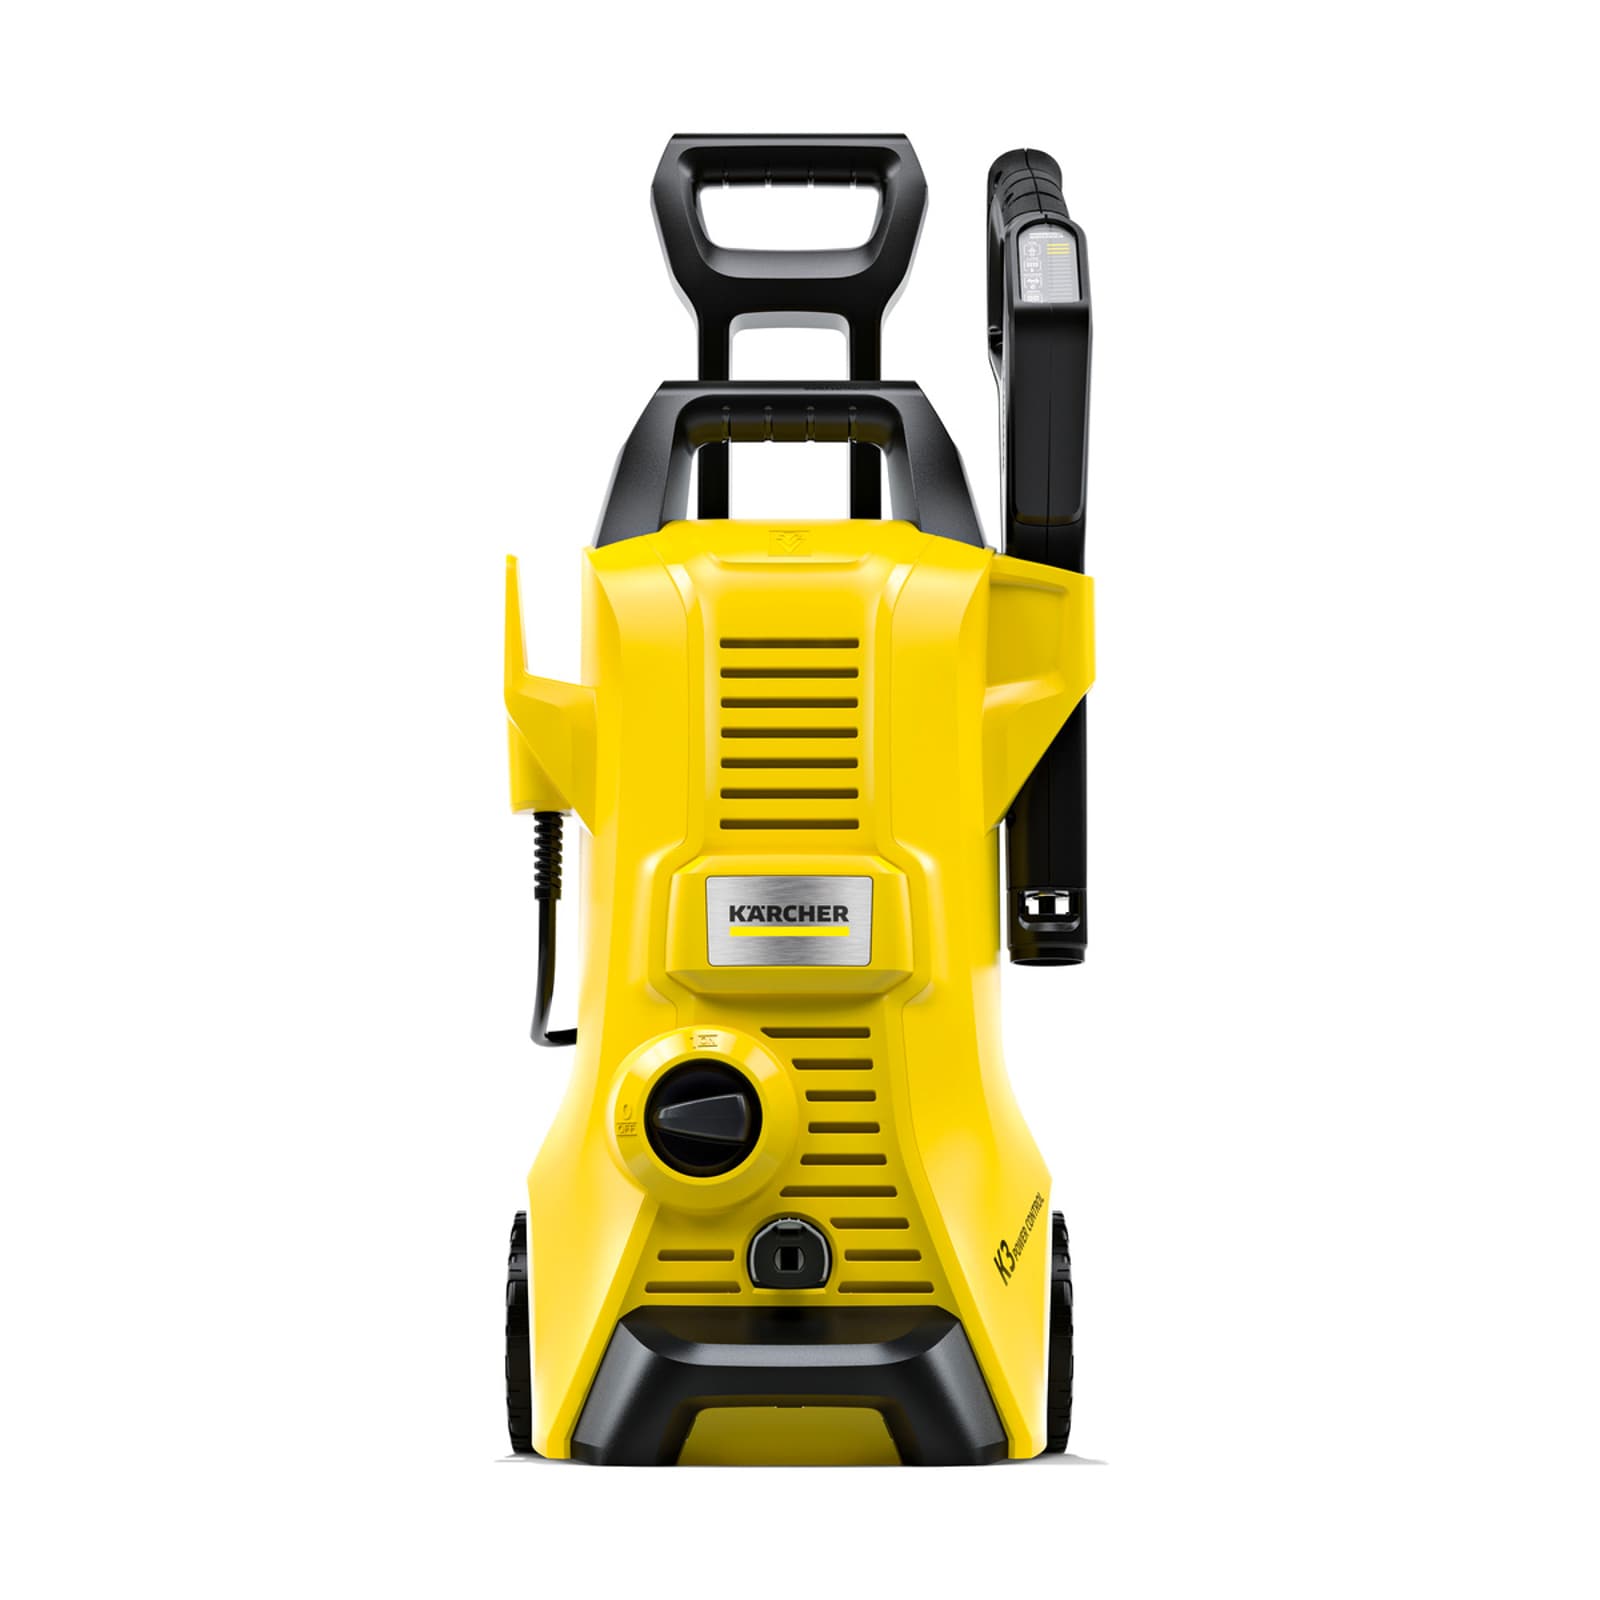 Karcher K4 Premium 1900-PSI 1.5-GPM Cold Water Electric Pressure Washer at